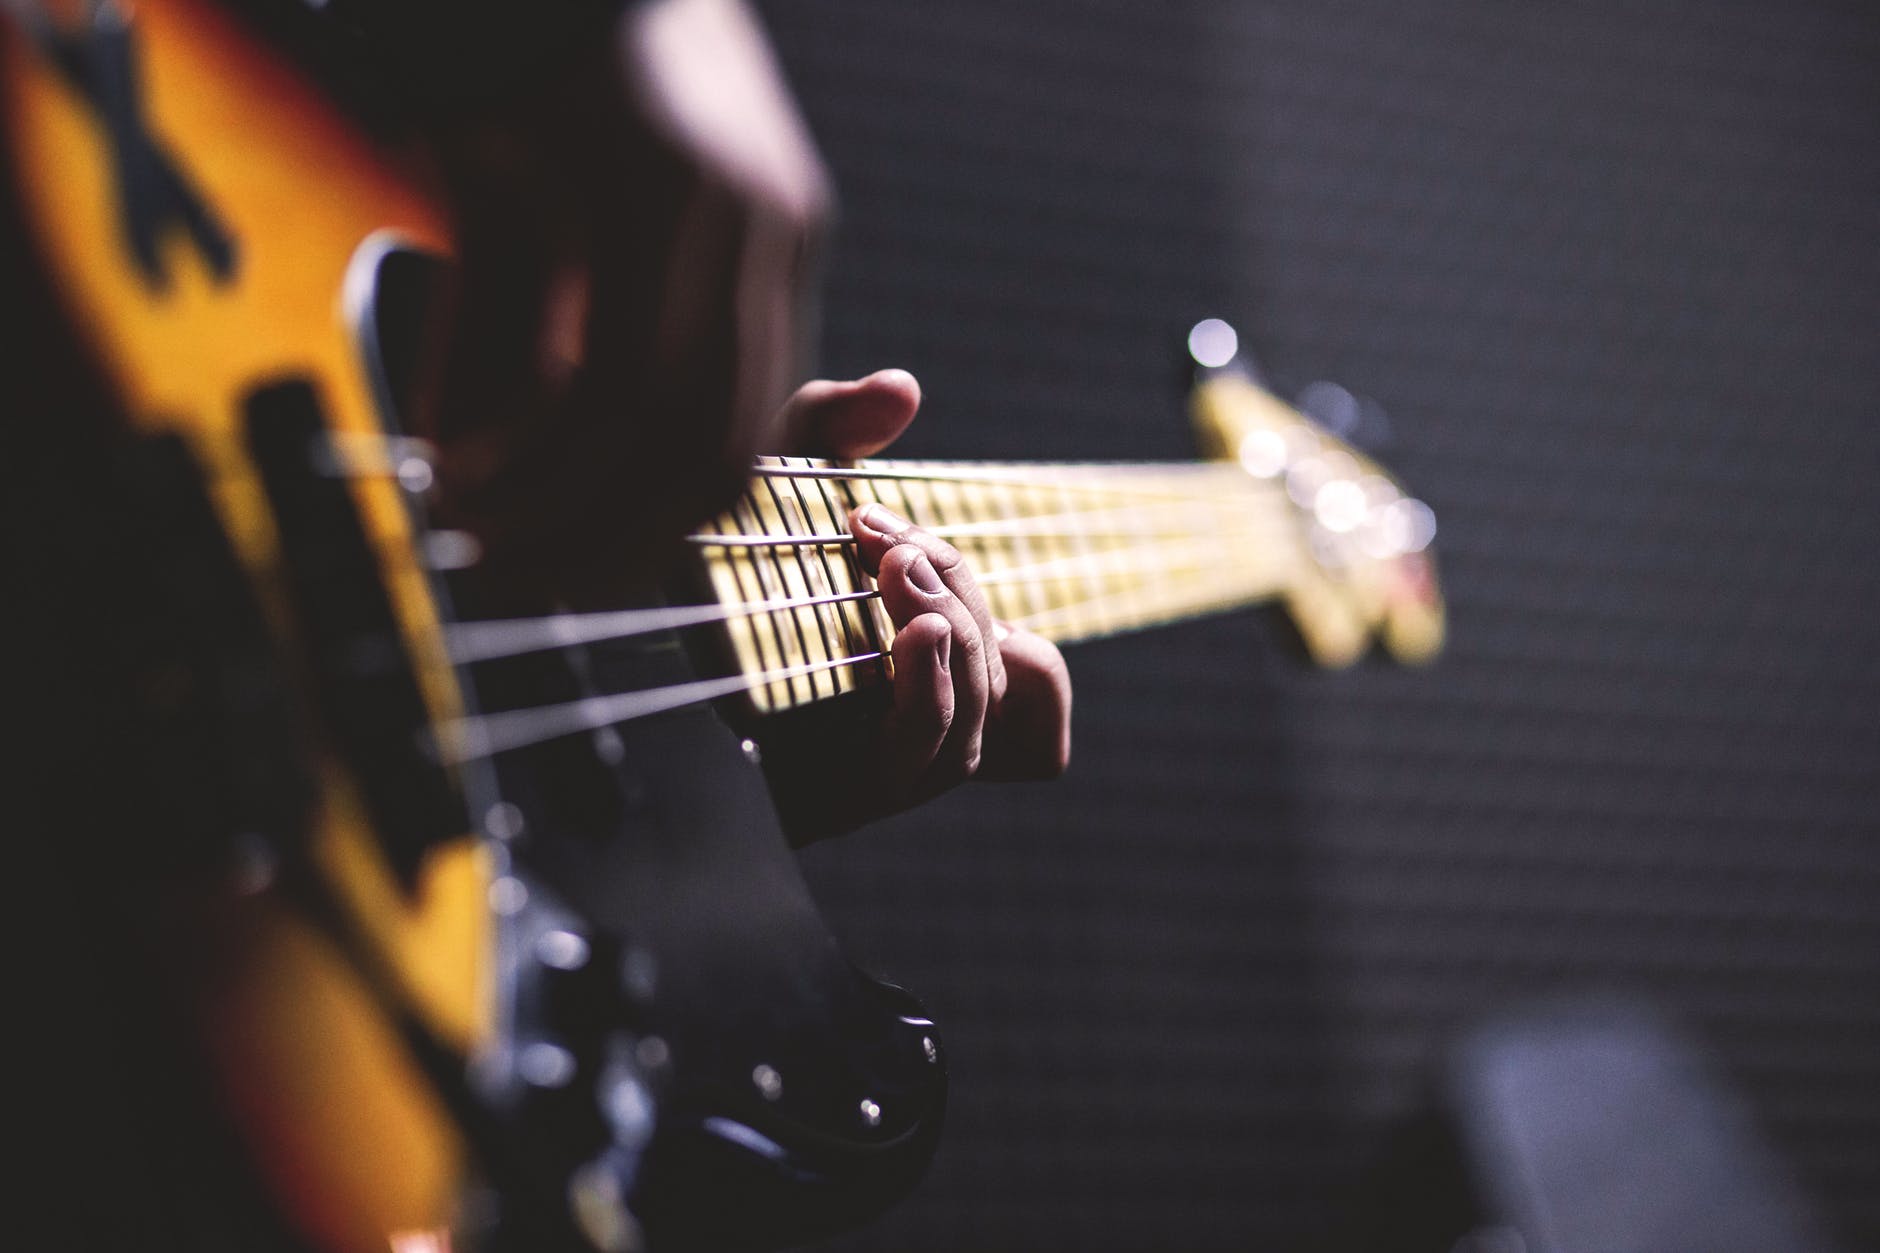 Photo by freestocks.org on <a href="https://www.pexels.com/photo/person-playing-sun-burst-electric-bass-guitar-in-bokeh-photography-96380/" rel="nofollow">Pexels.com</a>